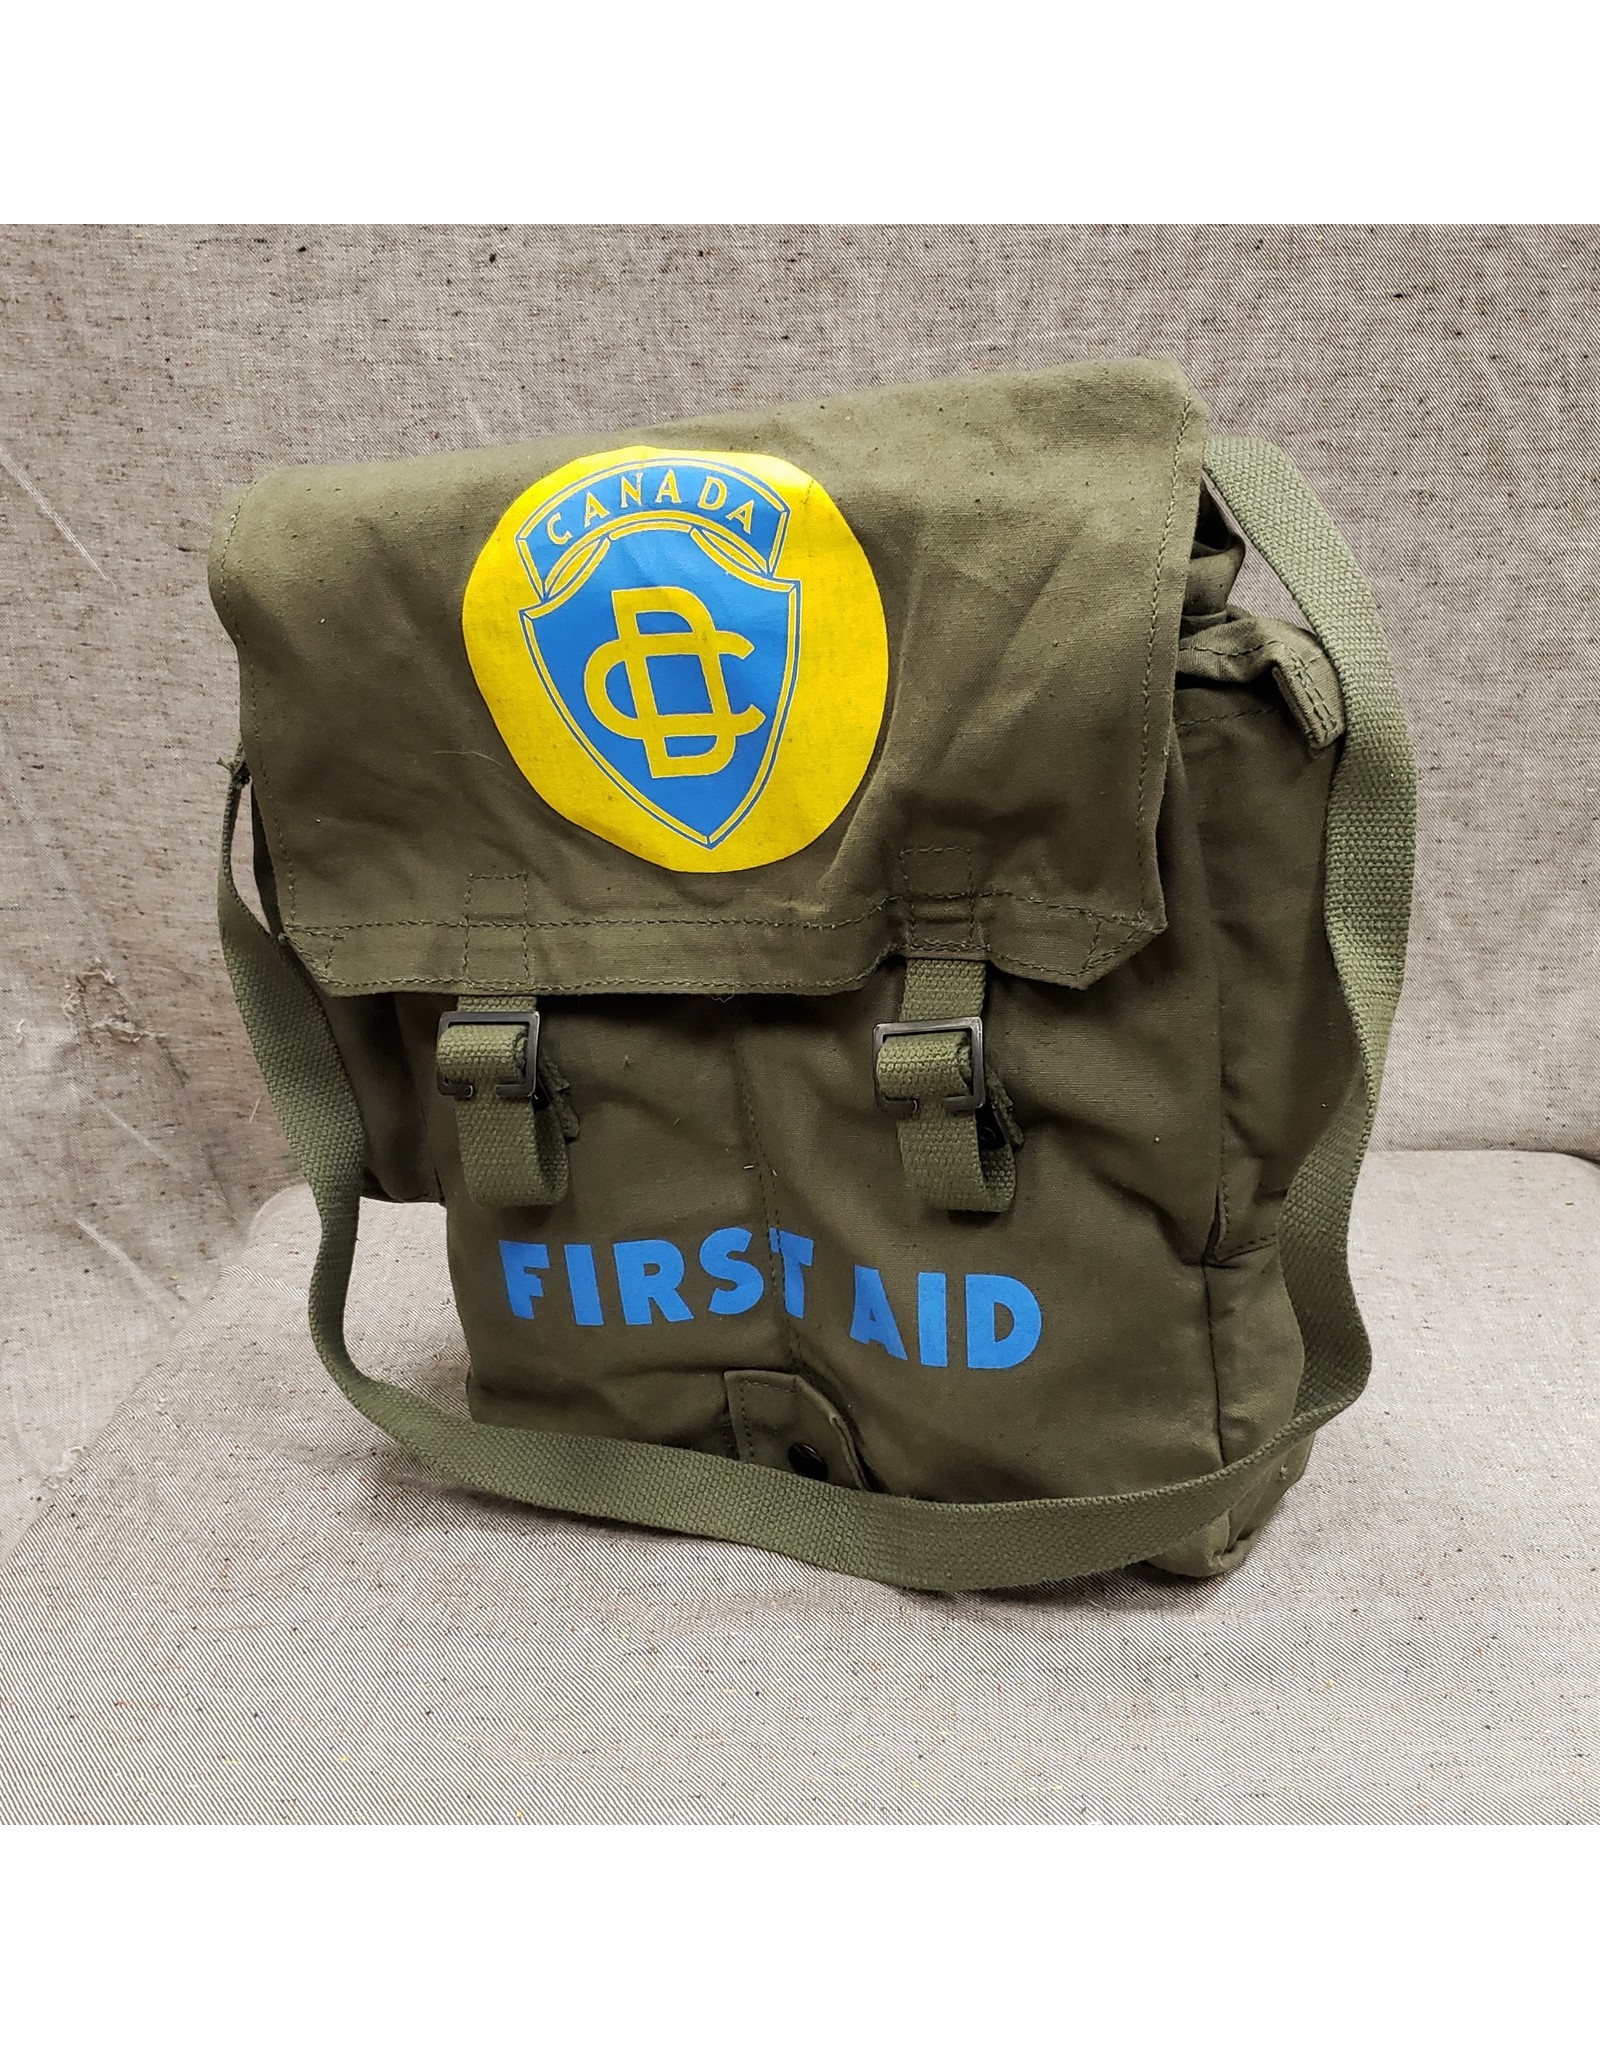 SURPLUS CANADIAN CIVIL DEFENCE FIRST AID POUCH